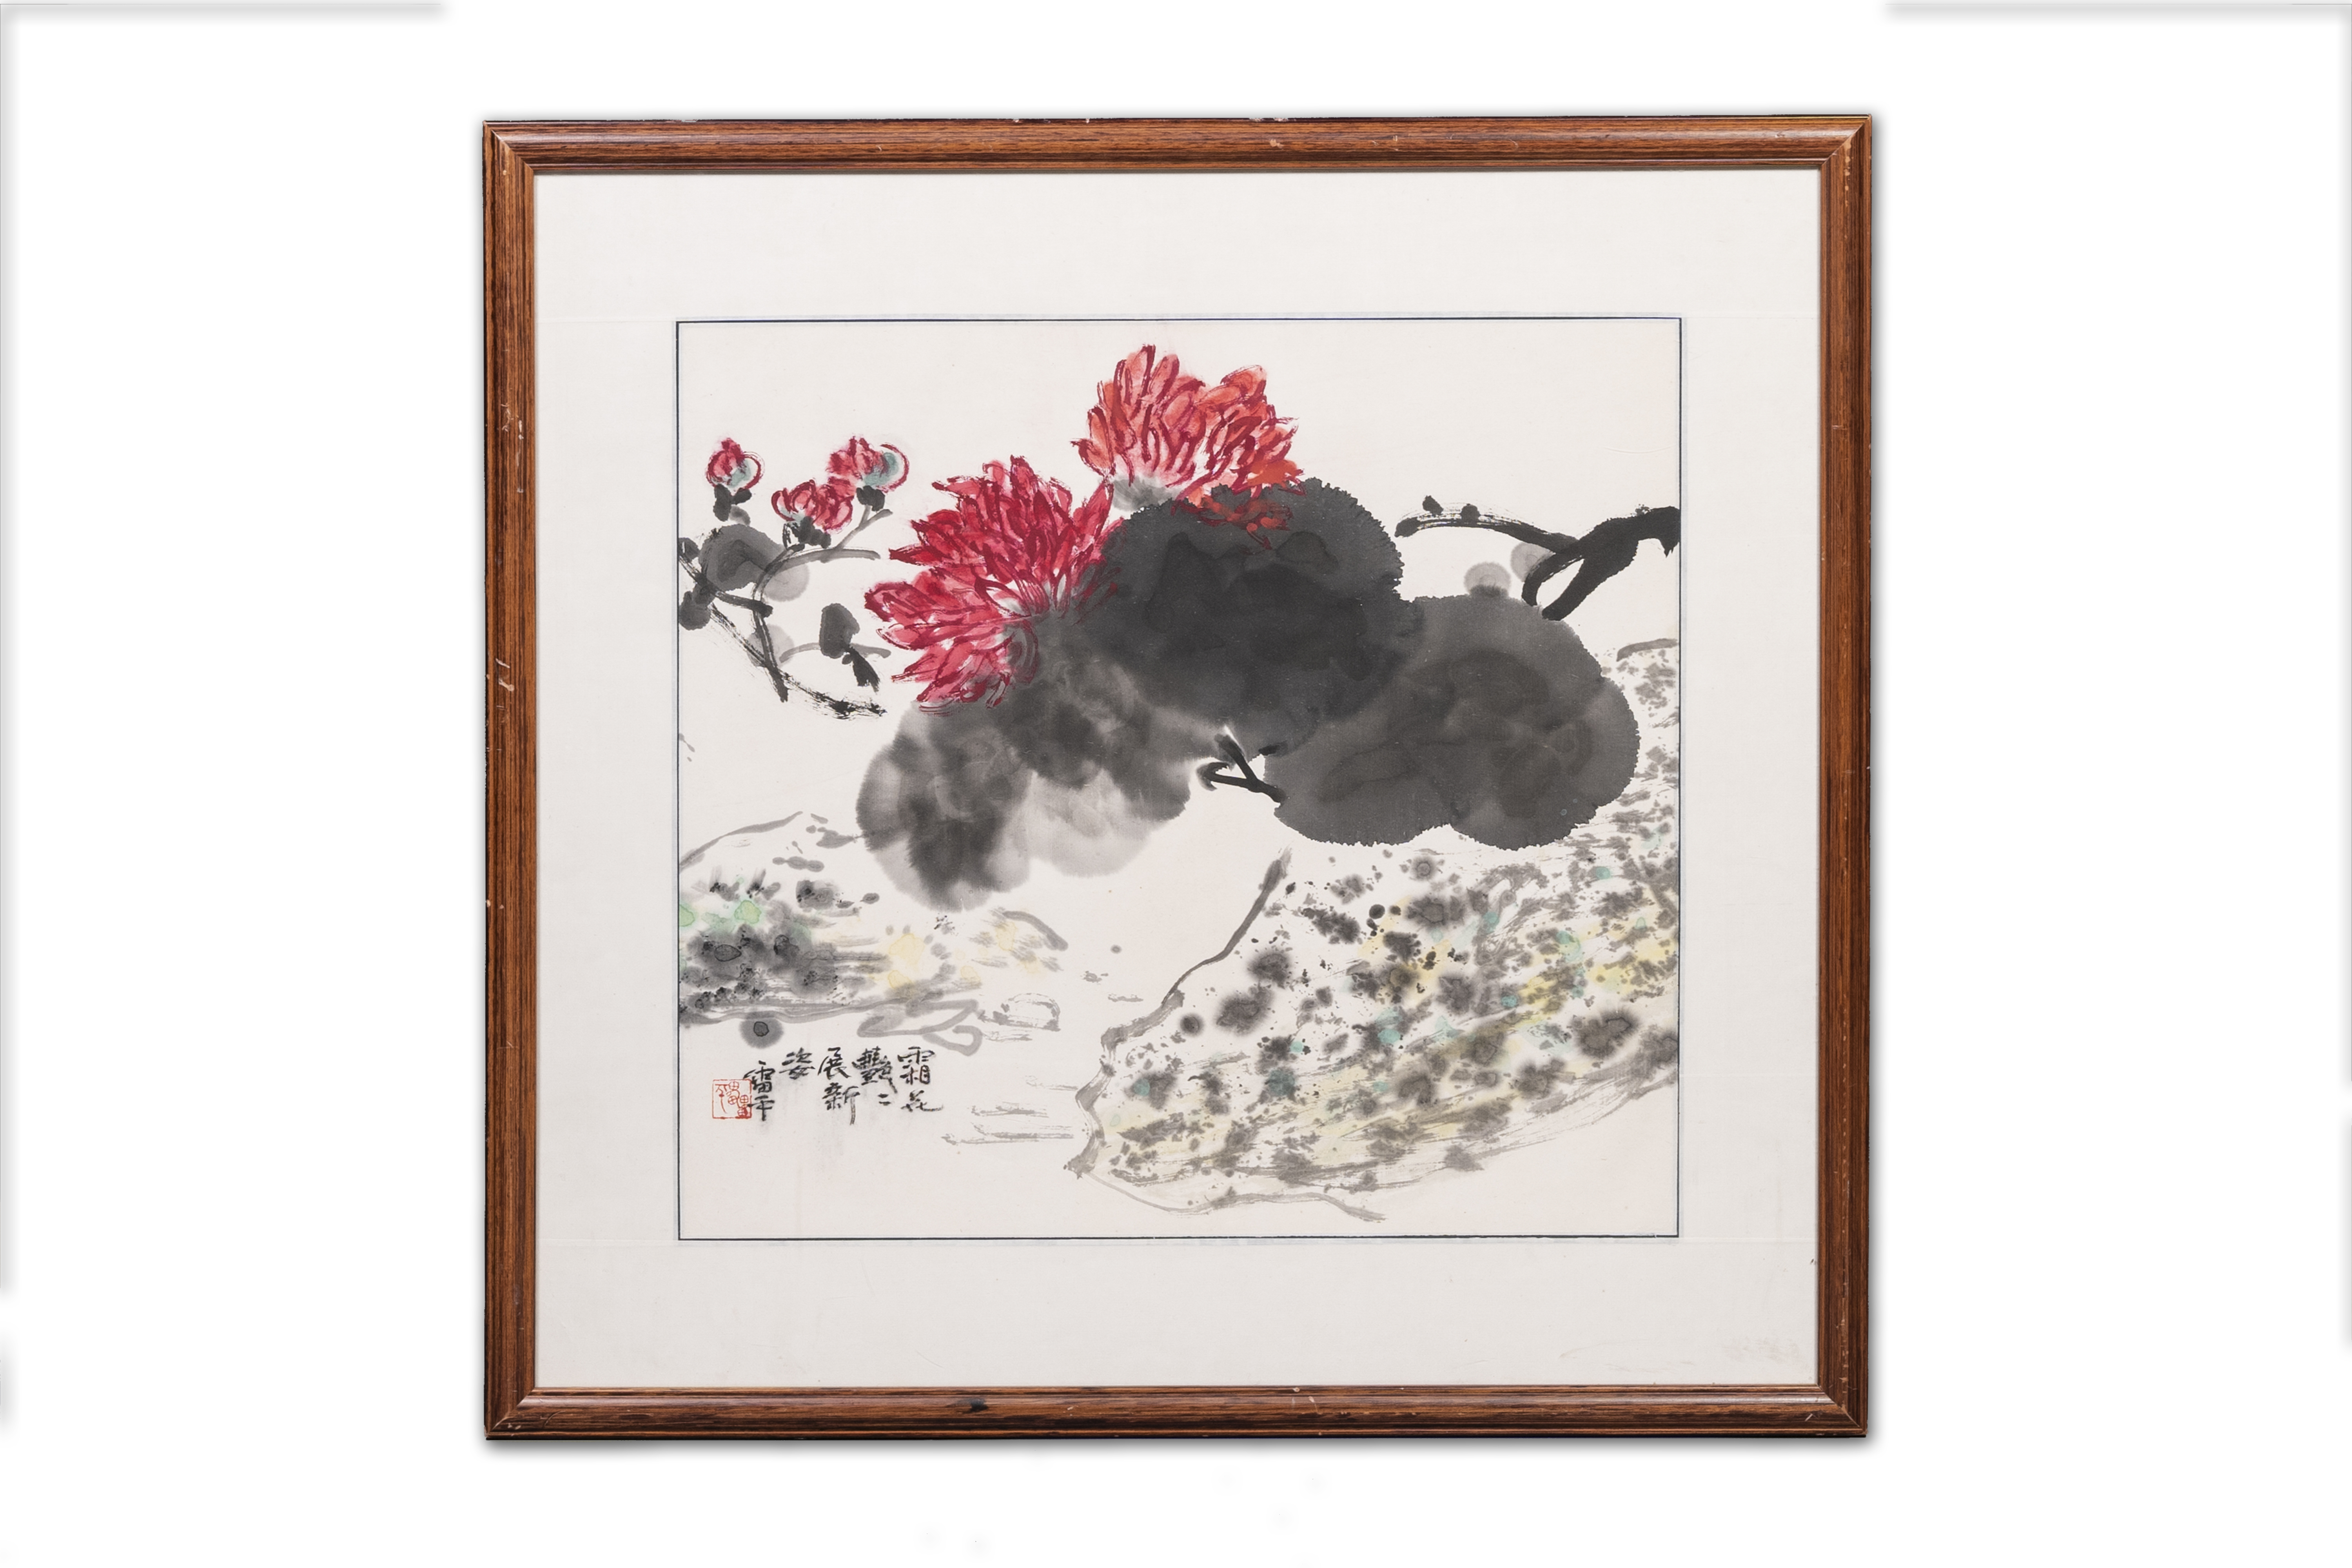 Zhang Leiping å¼µé›·å¹³ (1945): three various works, ink and color on paper, dated 1988 - Image 4 of 12